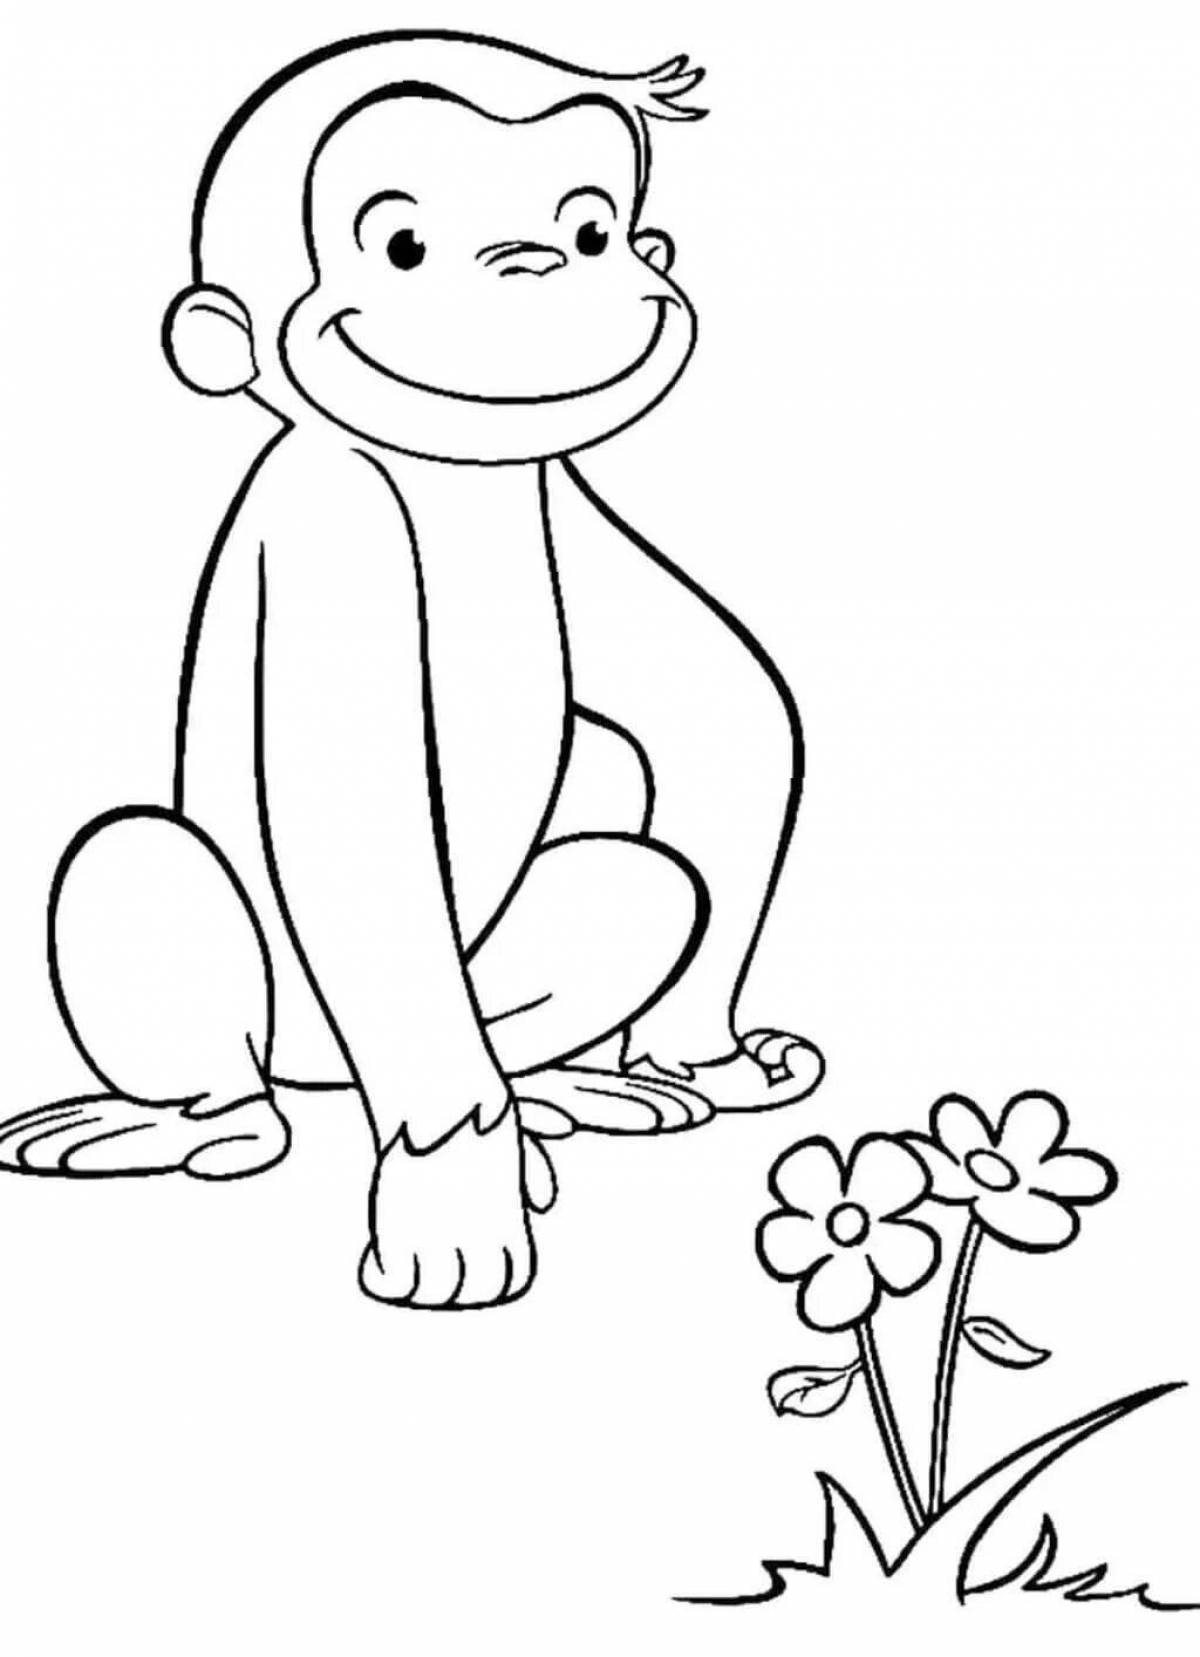 Chimpanzee coloring book for kids